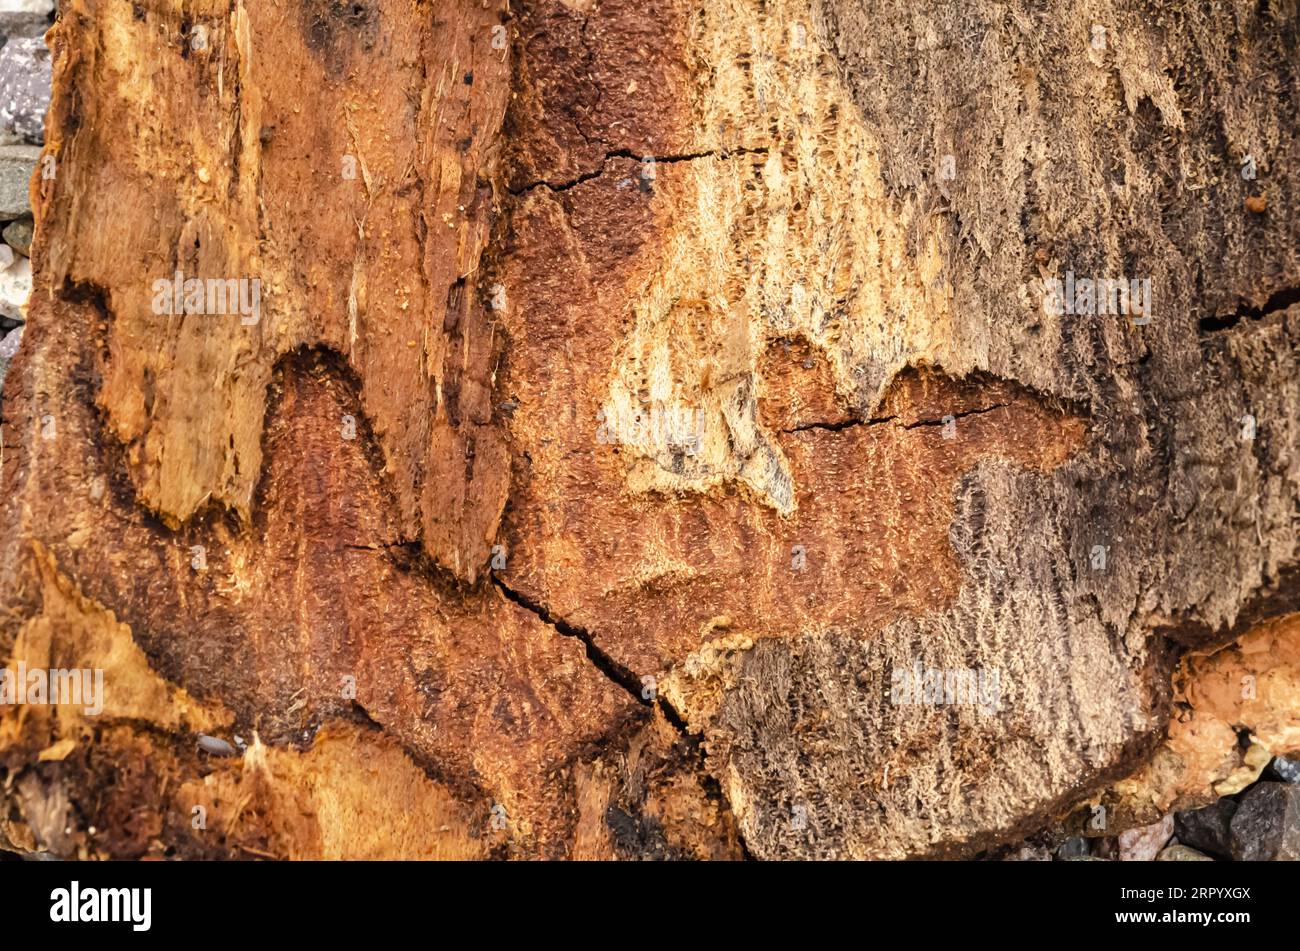 This is a closeup of the rough interior of a lebbeck tree bark oon the ground covered with pebbles. Stock Photo